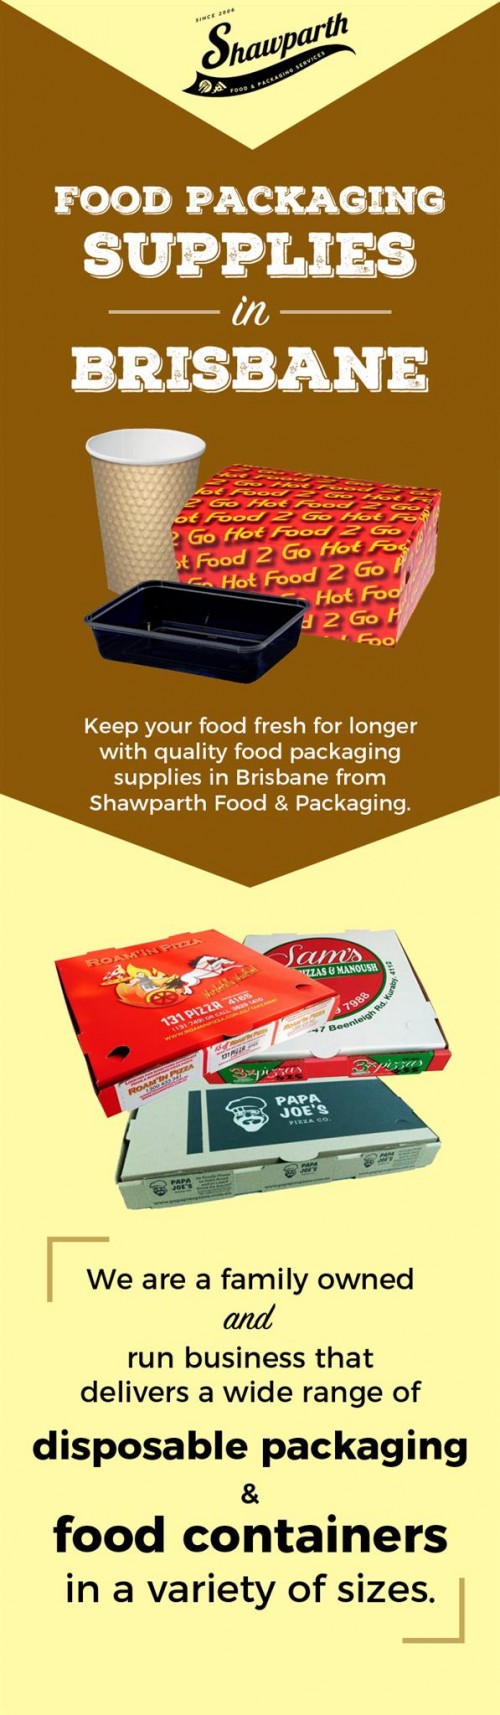 Shawparth Food and Packaging is a leading supplier of quality food packaging and disposal containers, serving the restaurants and pizzerias of Brisbane. We provide quality products at affordable prices. For details, visit - https://www.shawparth.com.au/brisbane/